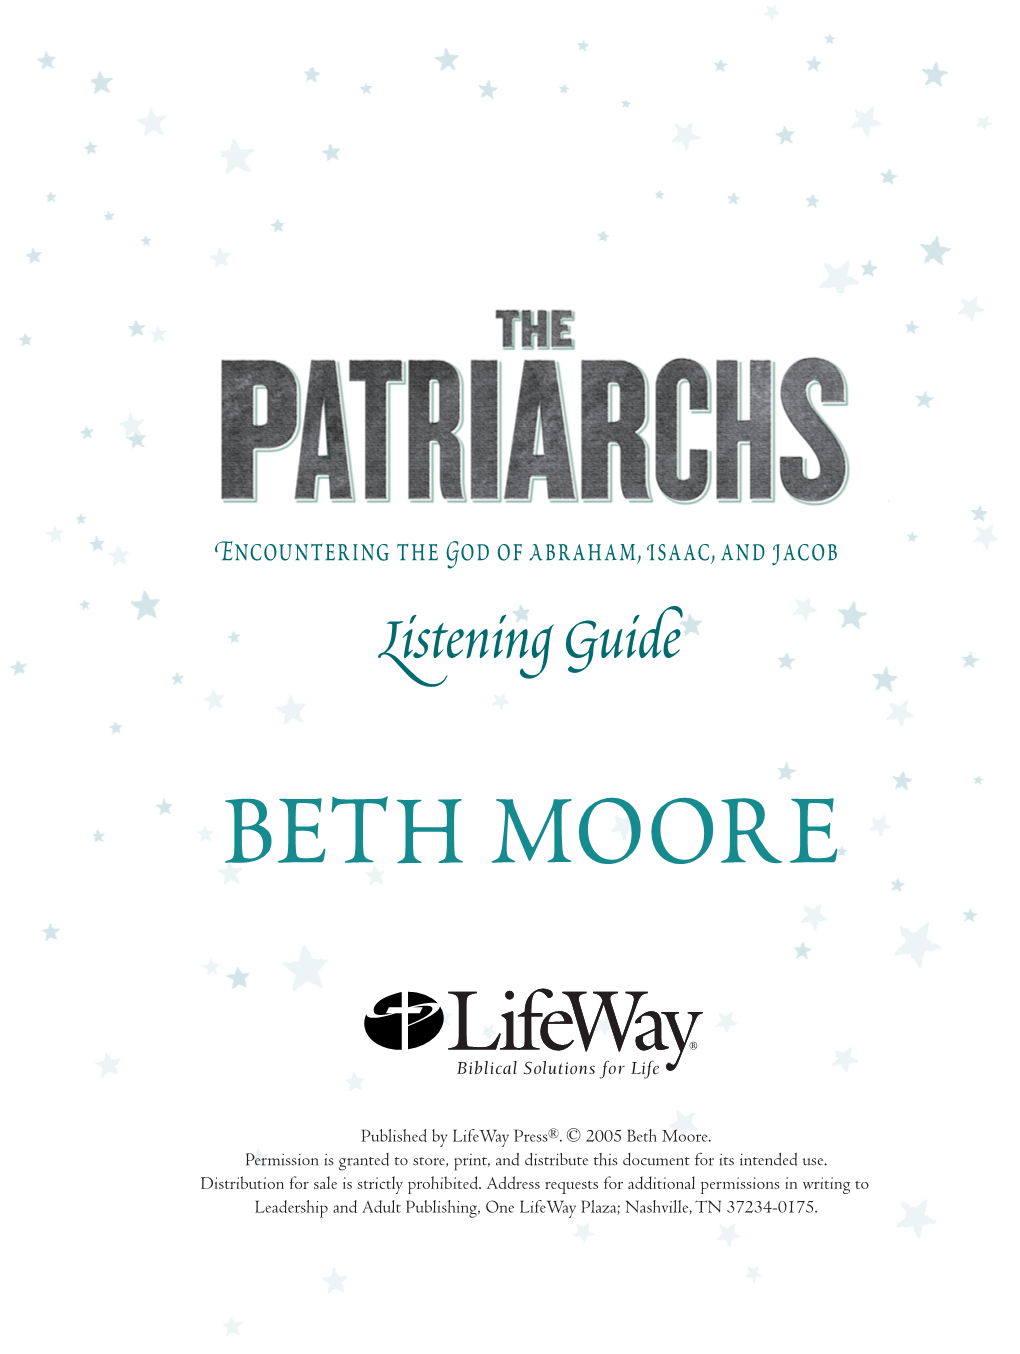 The Patriarchs Listening Guide